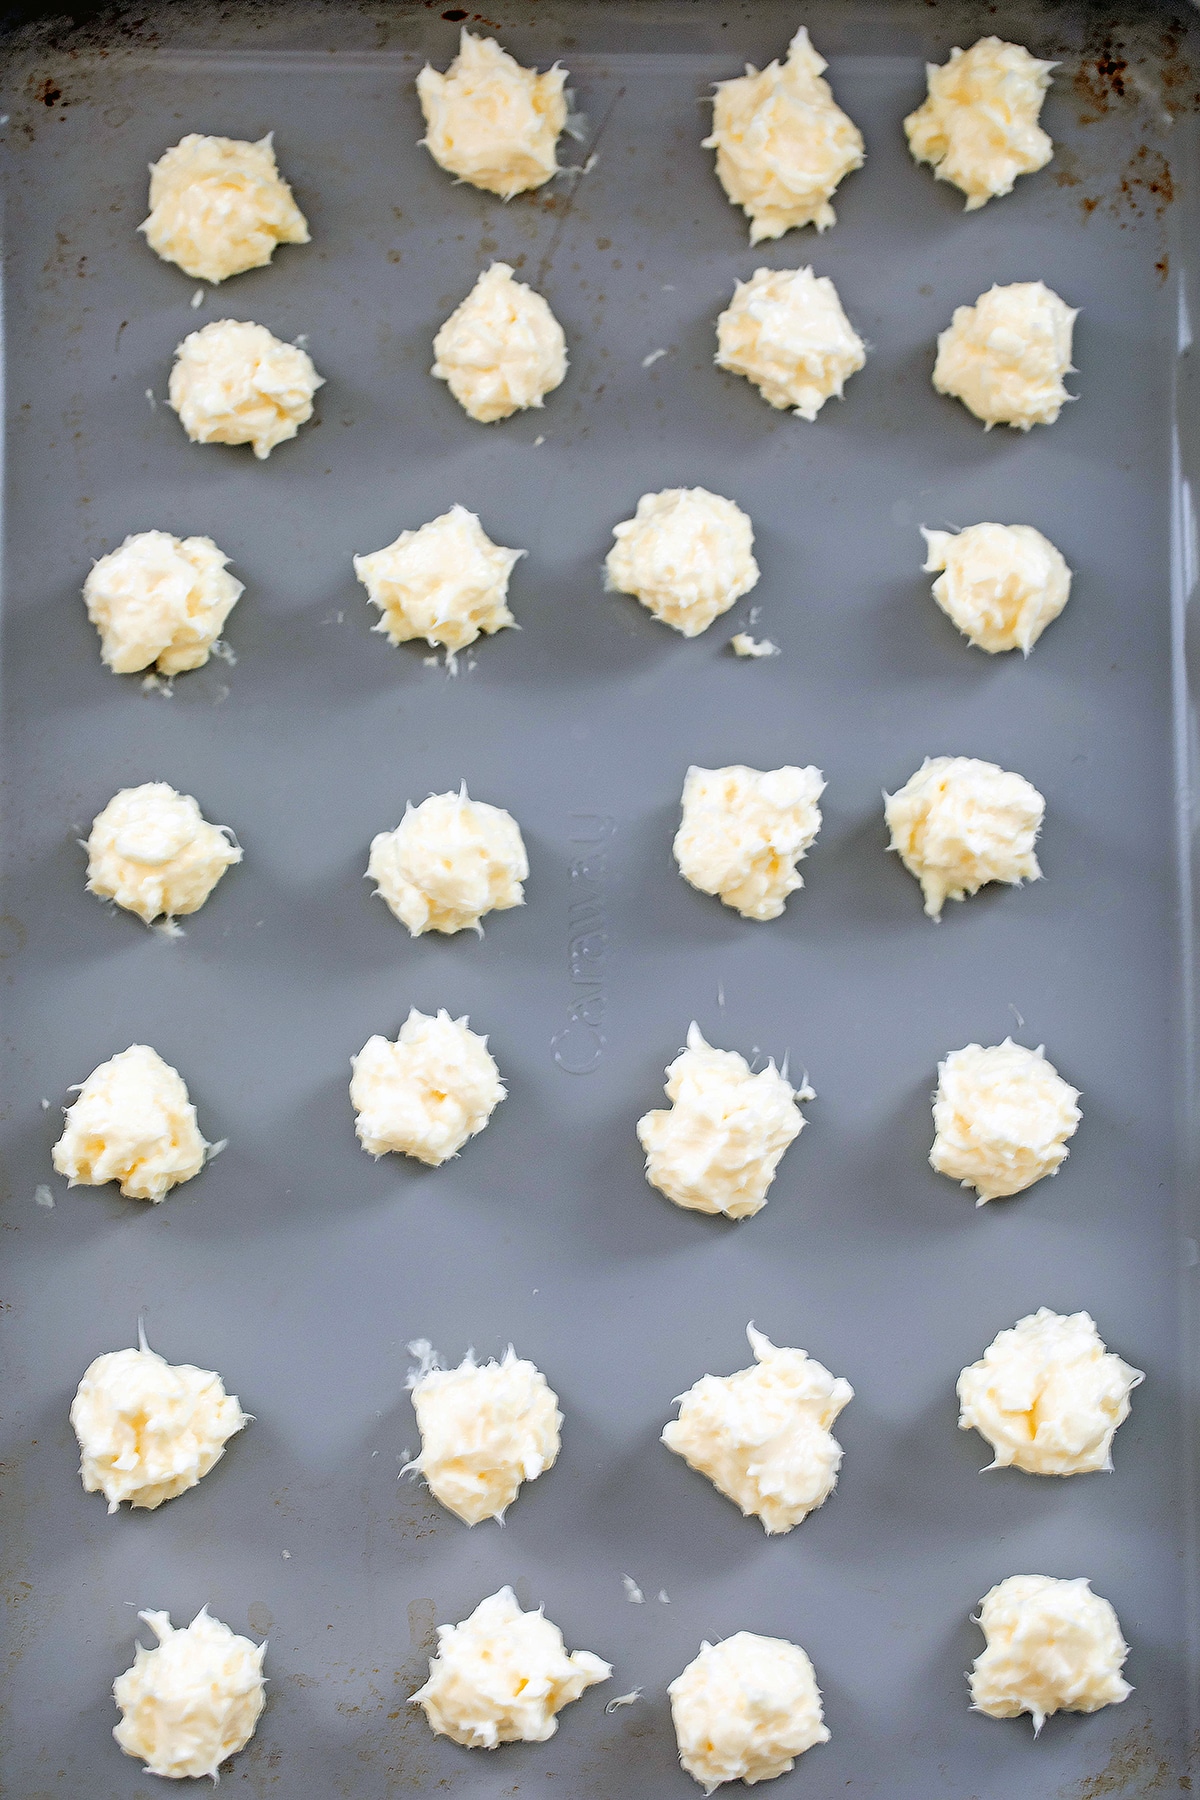 Cream cheese balls lined up on baking sheet.